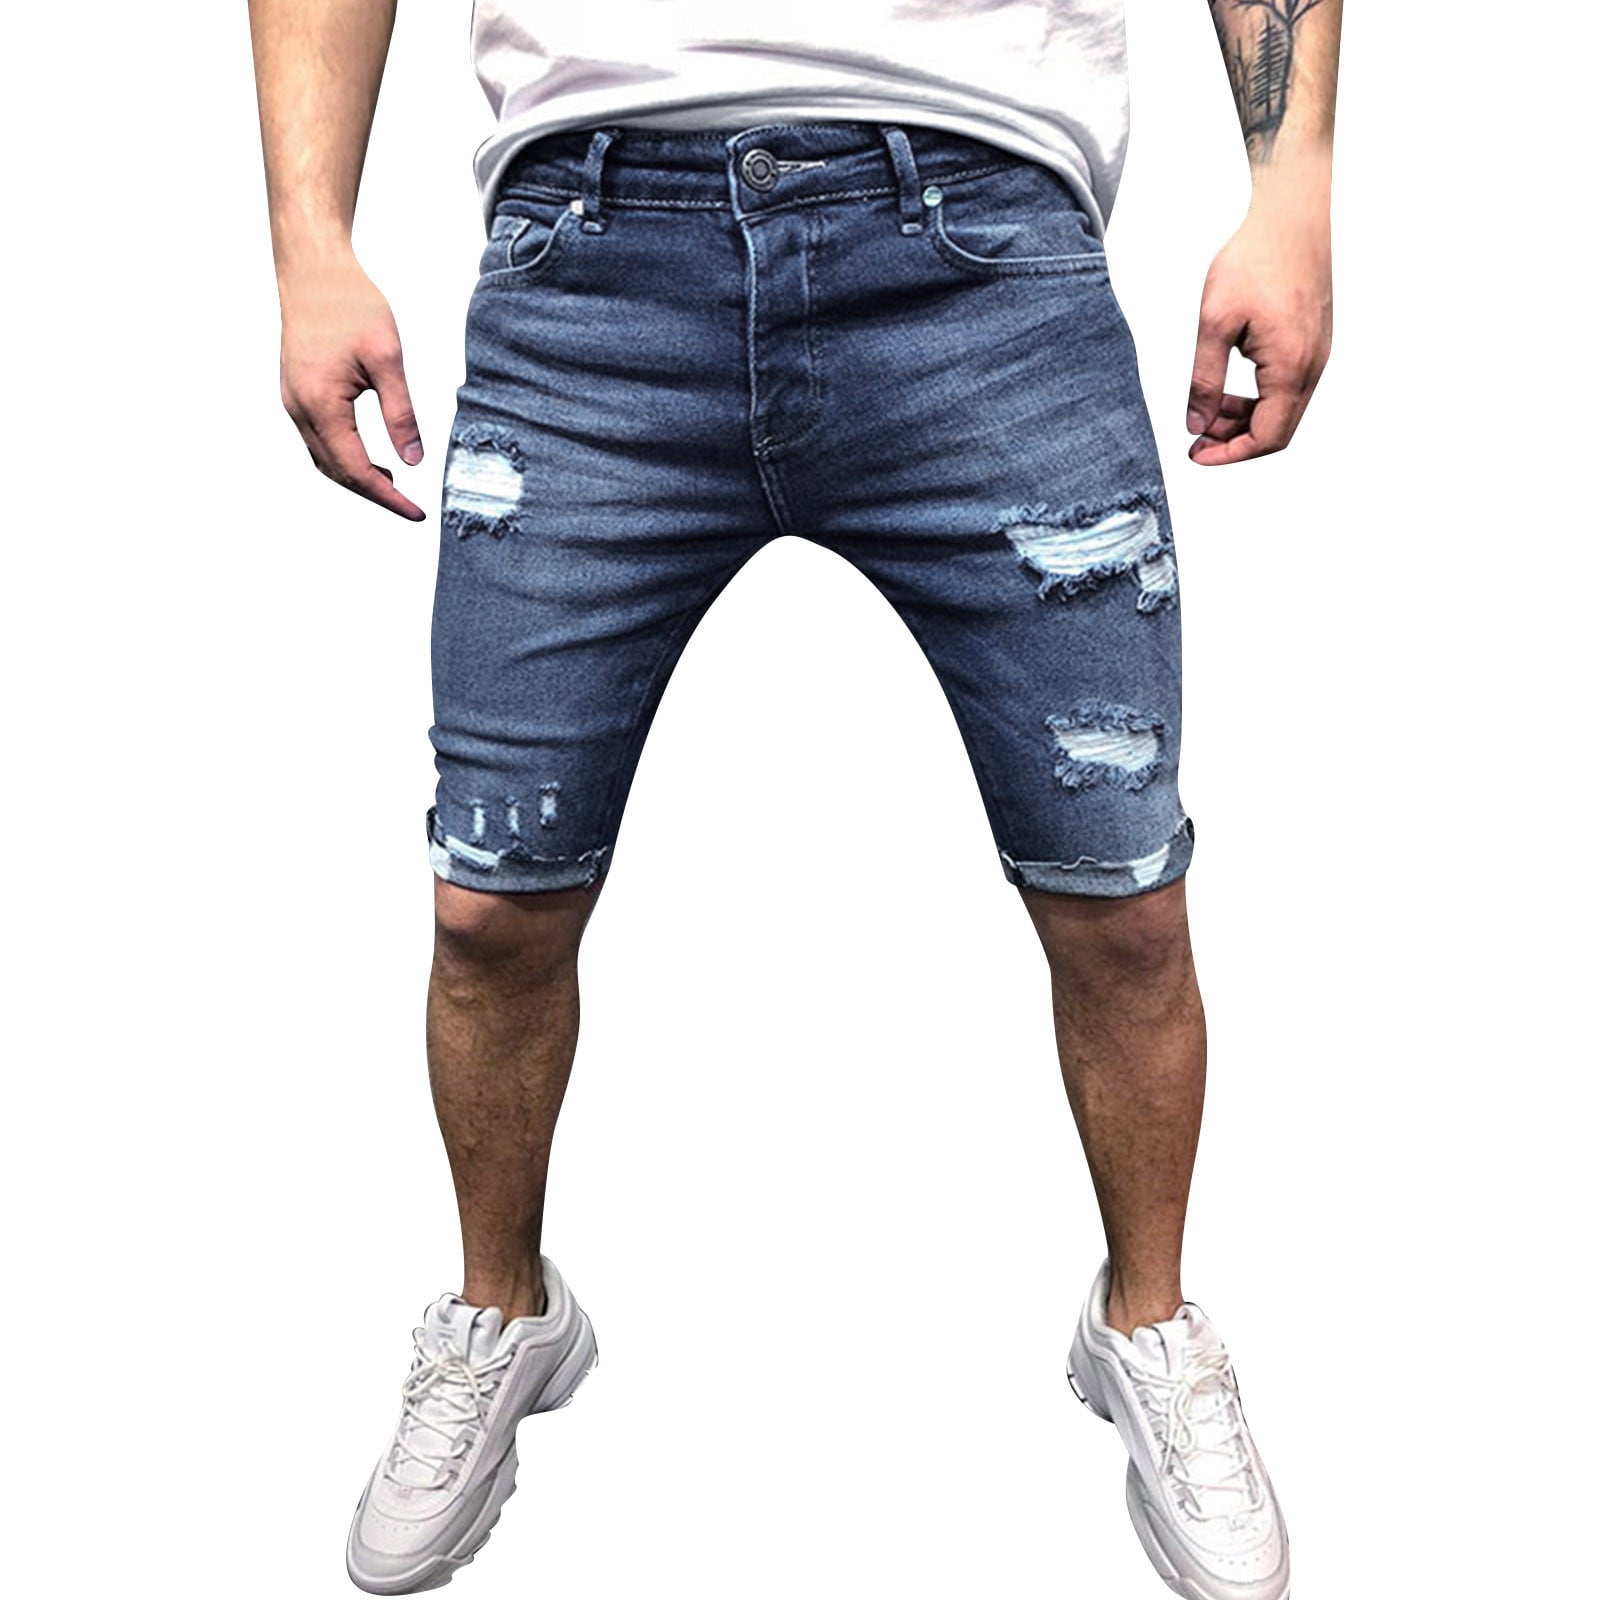 KaLI_store Work Pants for Men Men's Ripped Jeans Relaxed Fit